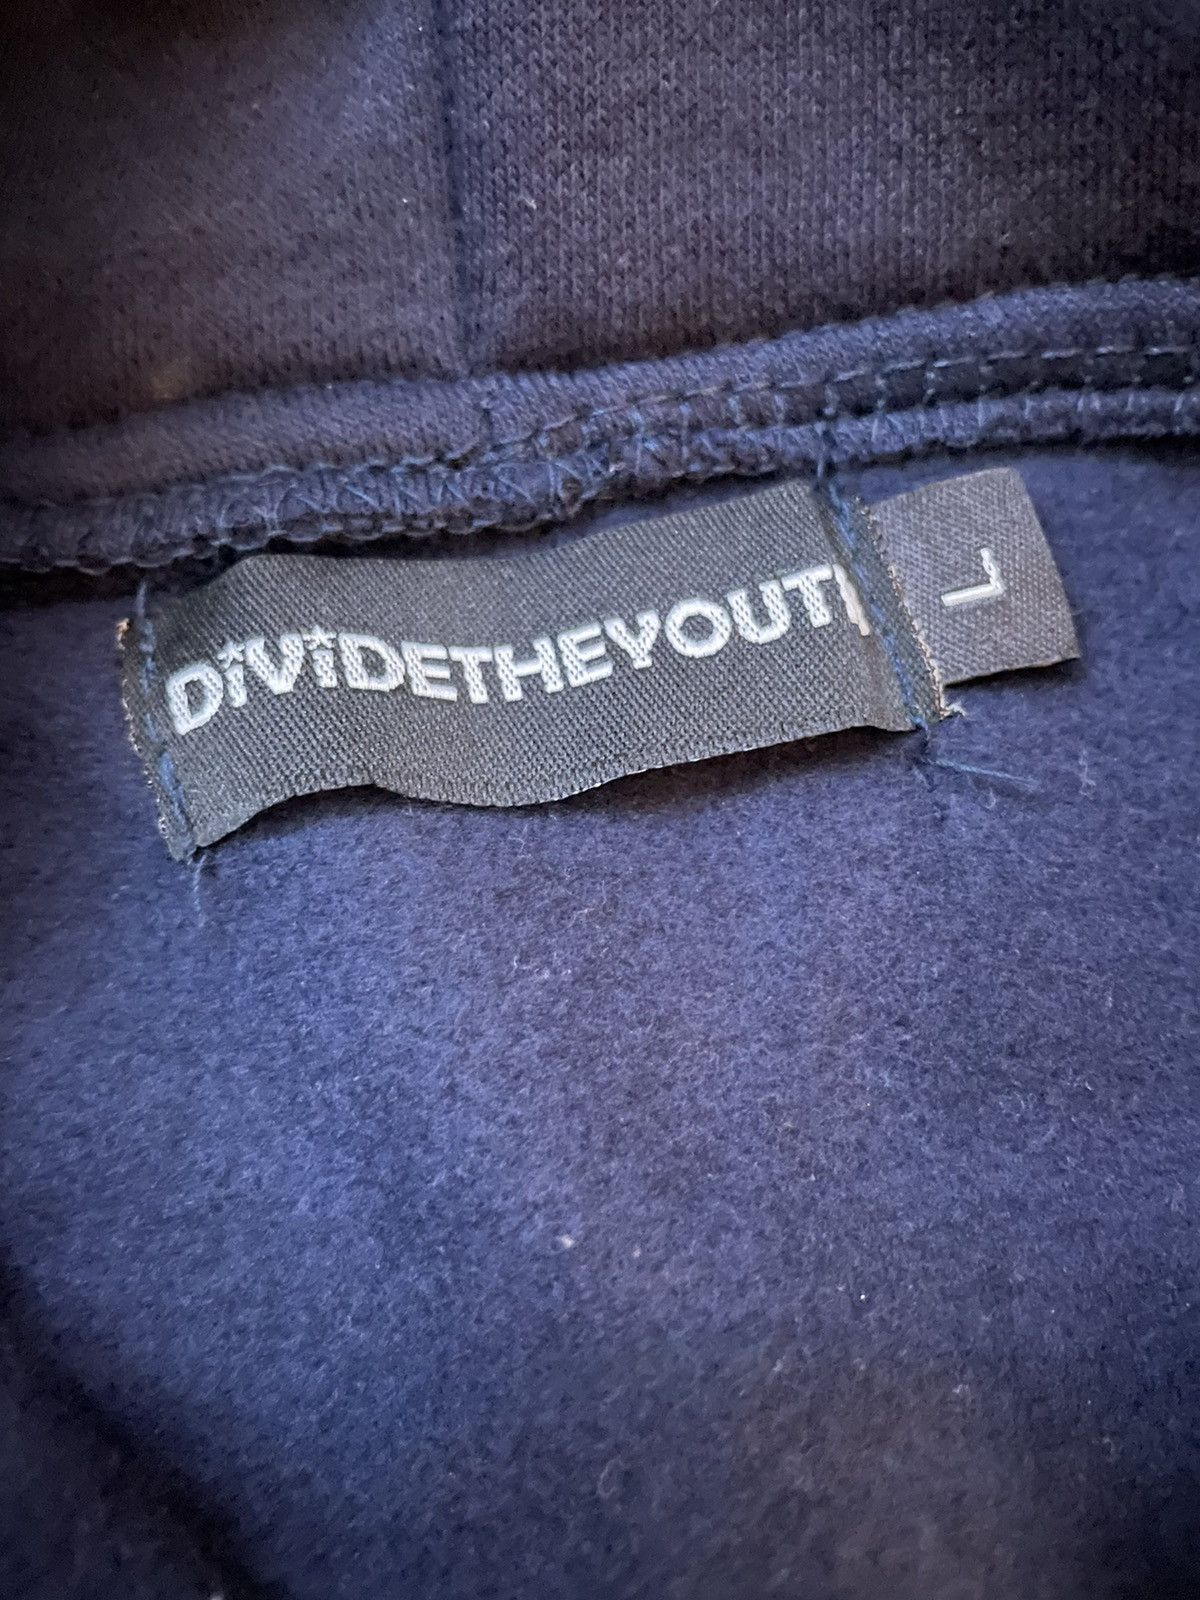 Streetwear Divide The Youth Navy Blue Zip Up Hoodie Size US L / EU 52-54 / 3 - 5 Preview